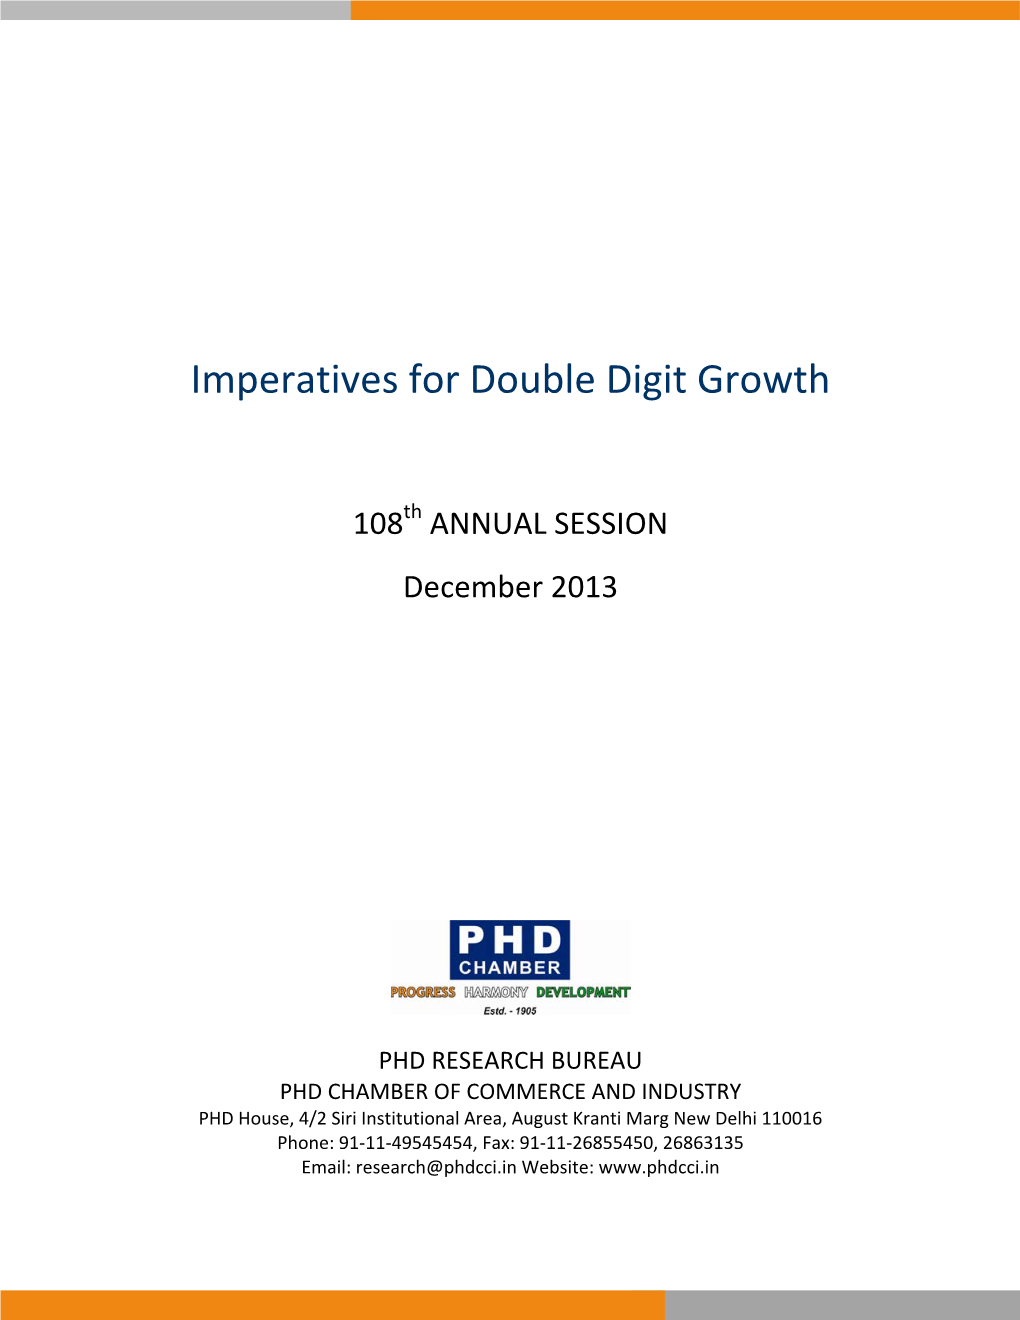 Imperatives for Double Digit Growth